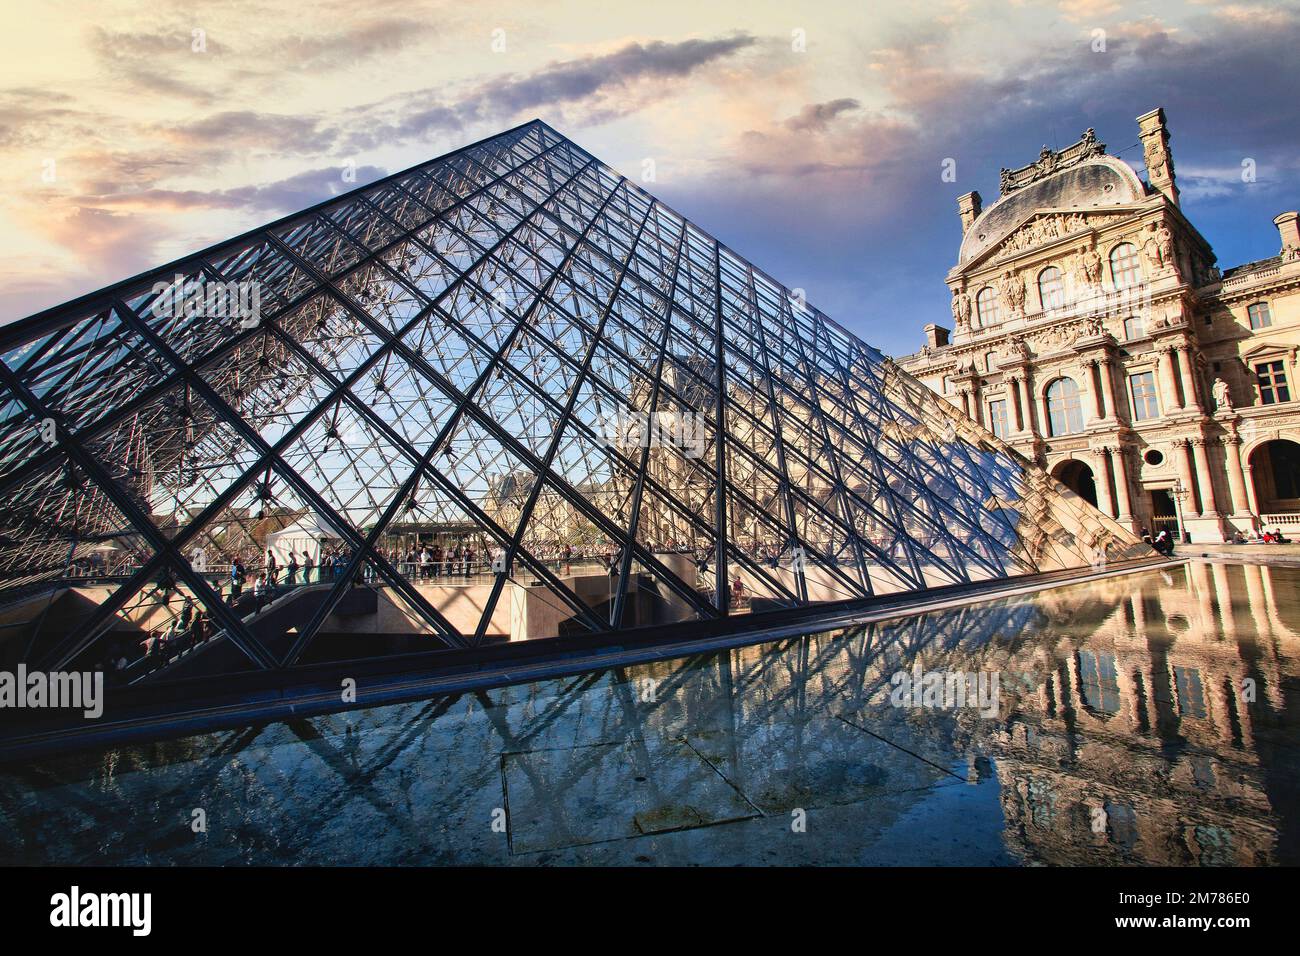 The center courtyard and dramatic pyramid entrance at the Louvre Museum in Paris, France. Stock Photo